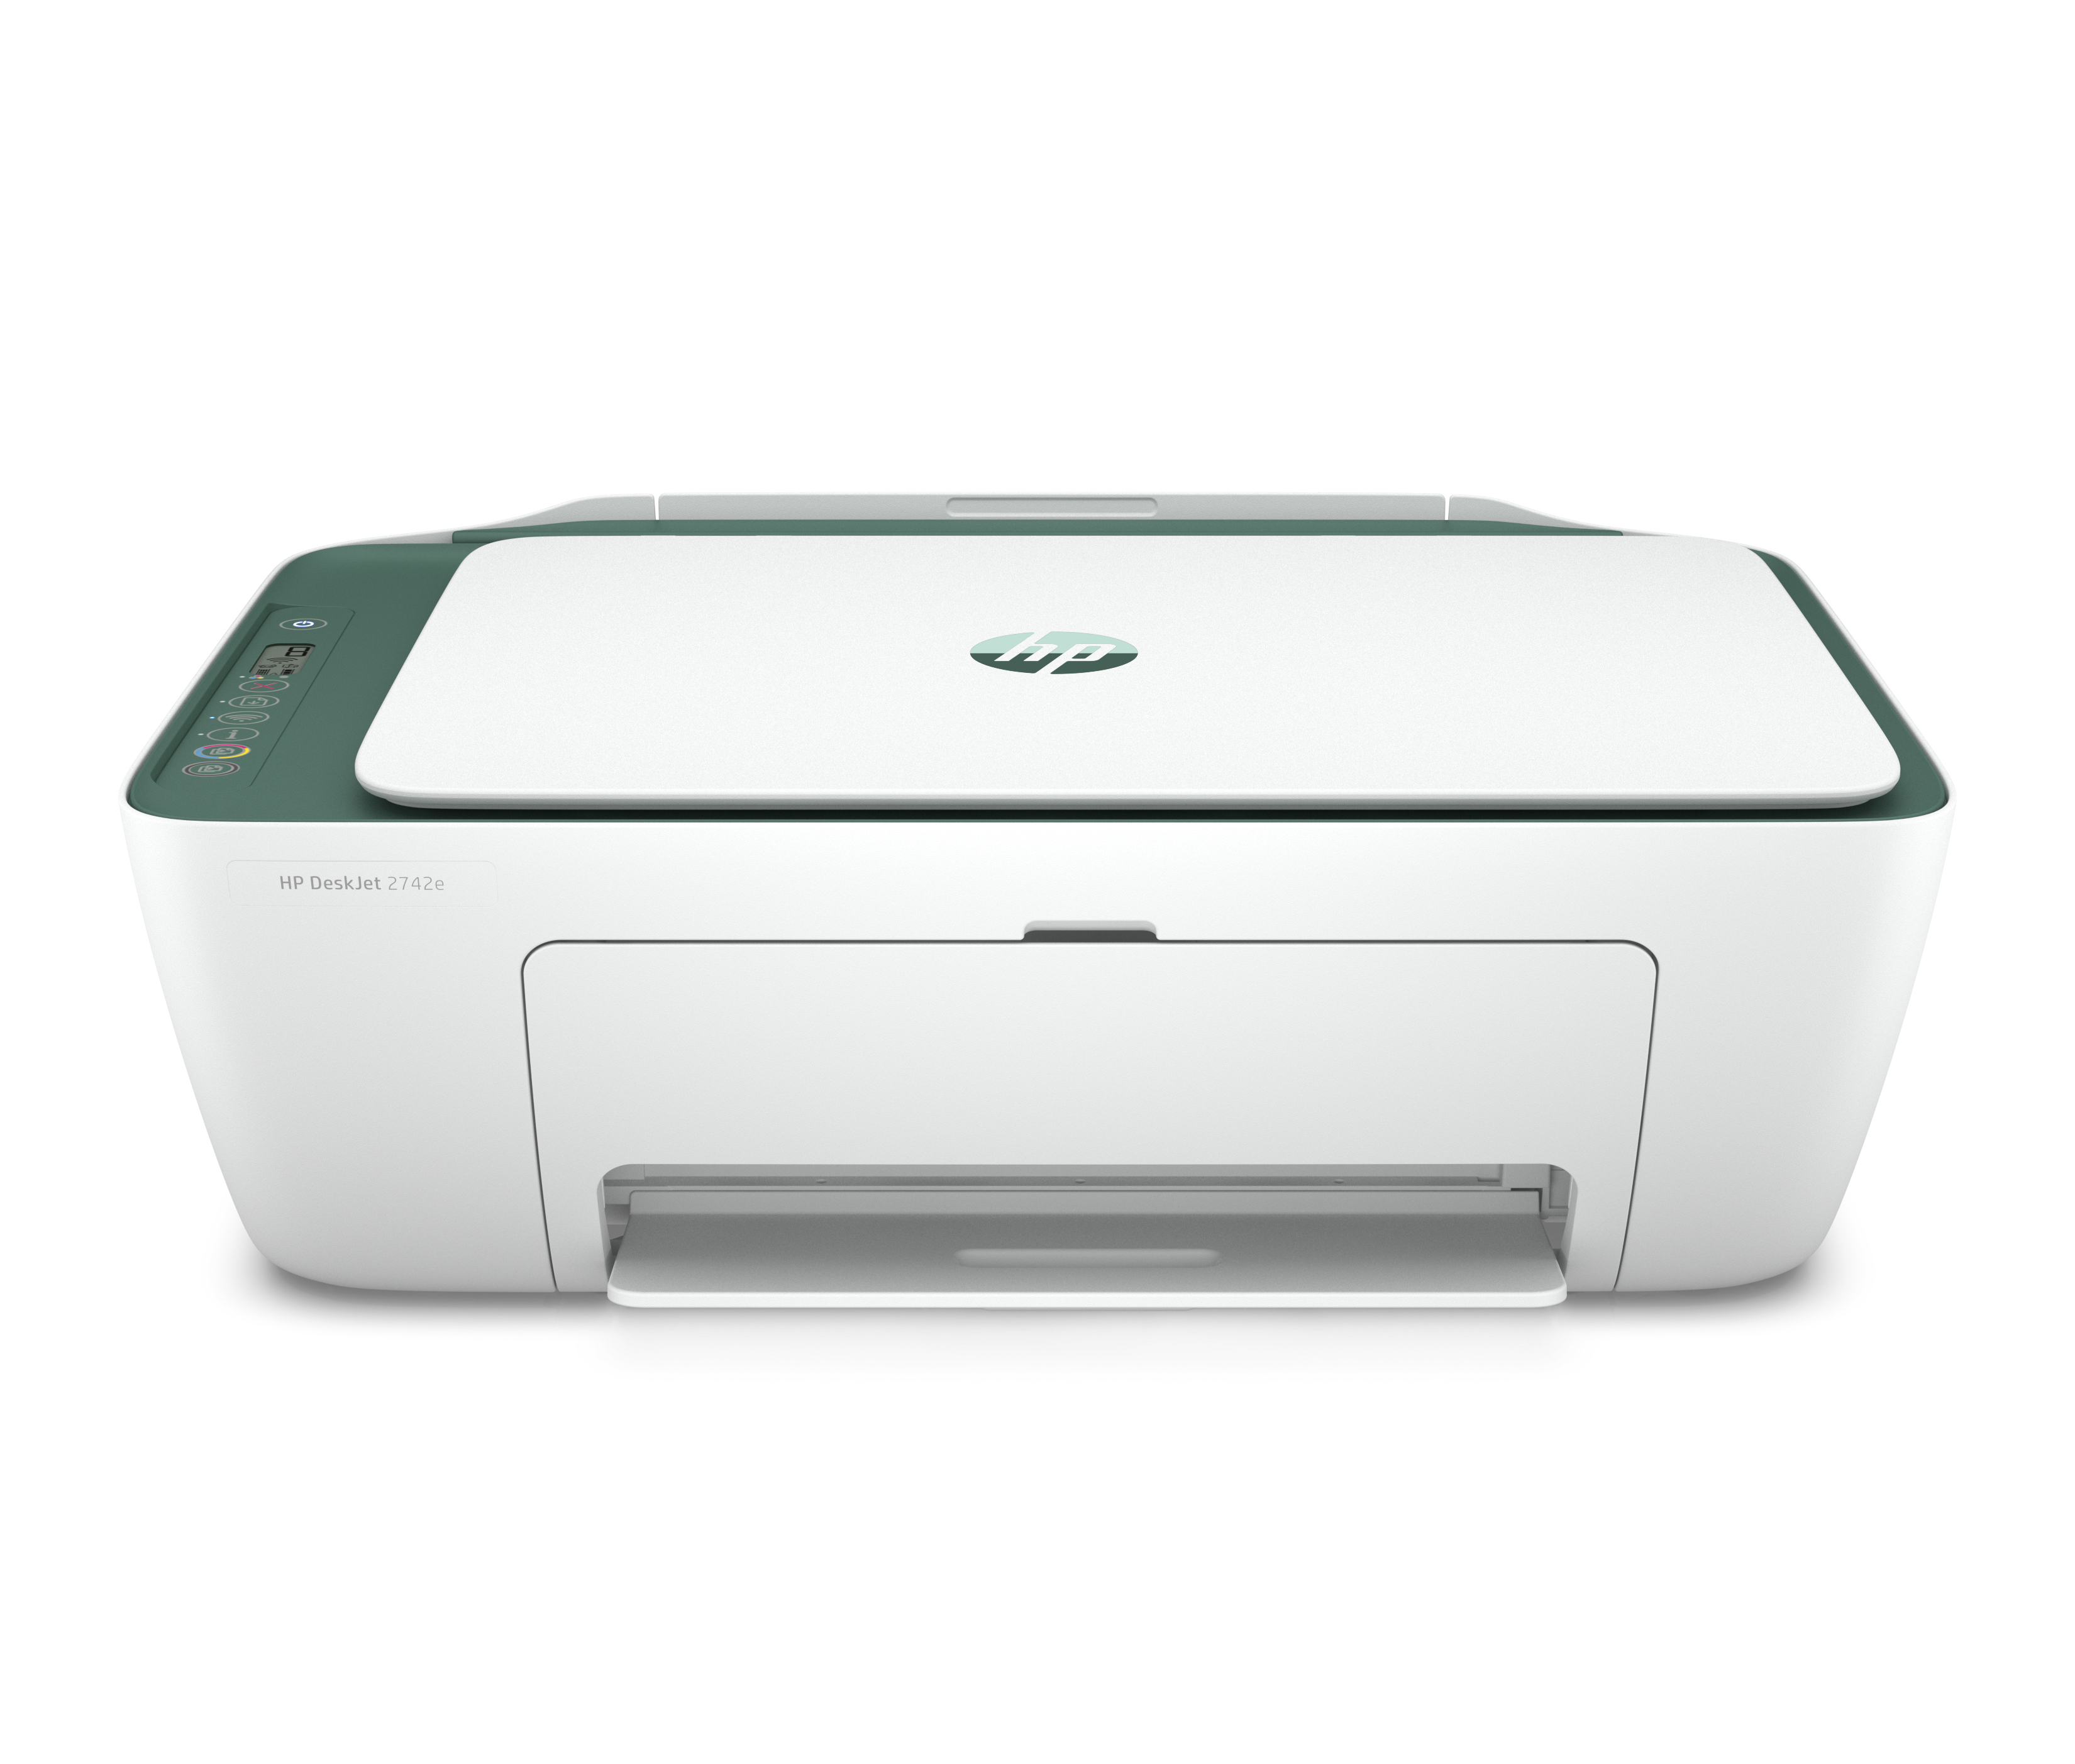 HP DeskJet 2742e All-in-One Wireless Color Inkjet Printer (Sequoia) - 6 months free Instant Ink with HP+ - image 1 of 10